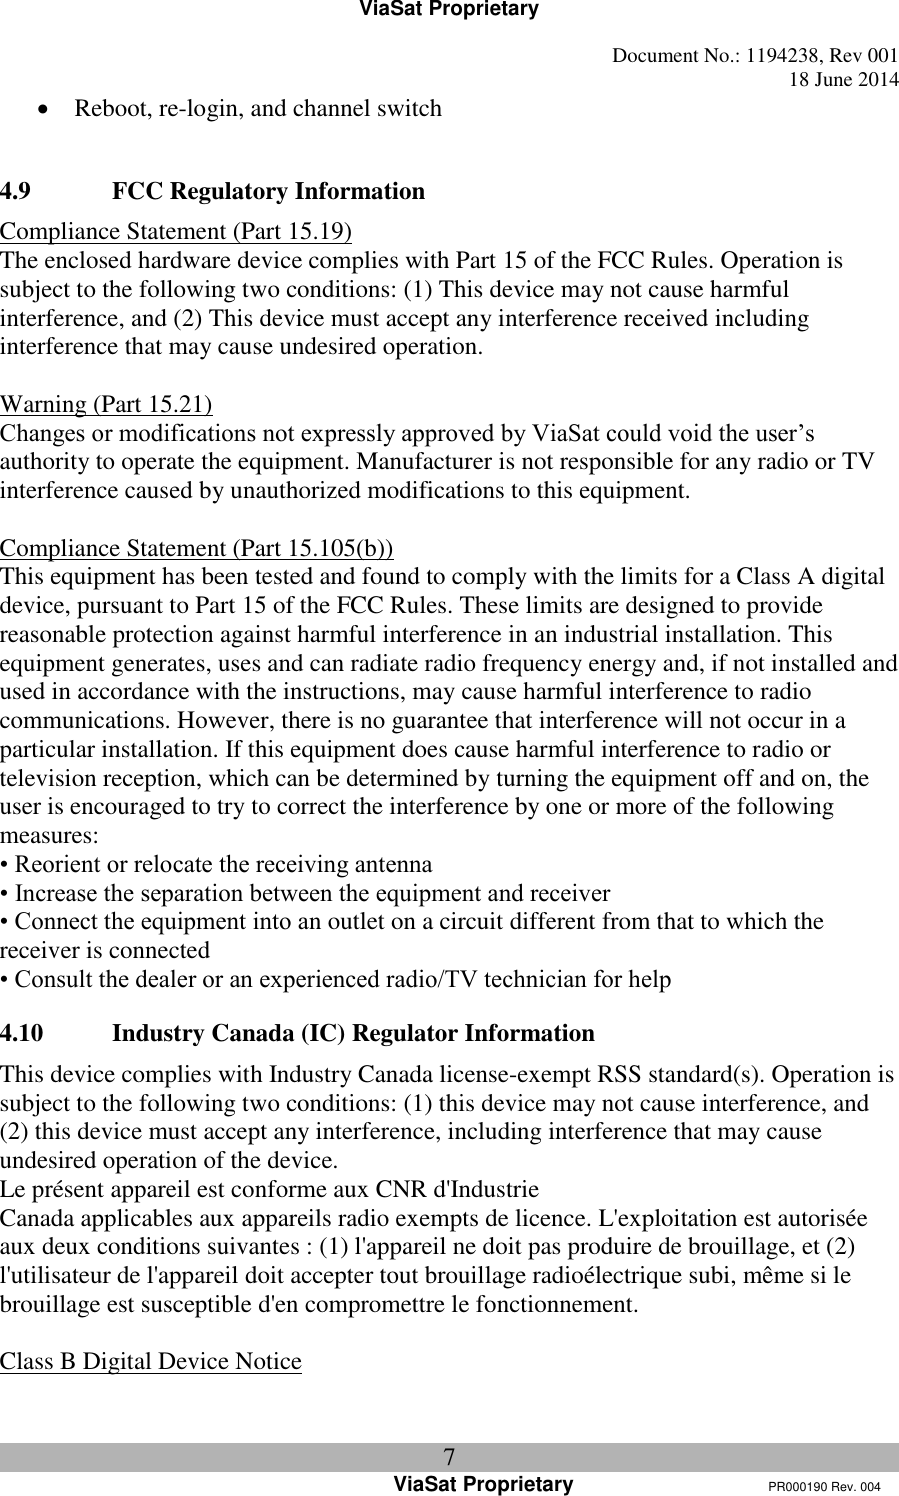 ViaSat Proprietary   Document No.: 1194238, Rev 001  18 June 2014 7 ViaSat Proprietary      PR000190 Rev. 004  Reboot, re-login, and channel switch  4.9 FCC Regulatory Information Compliance Statement (Part 15.19) The enclosed hardware device complies with Part 15 of the FCC Rules. Operation is subject to the following two conditions: (1) This device may not cause harmful interference, and (2) This device must accept any interference received including interference that may cause undesired operation.  Warning (Part 15.21) Changes or modifications not expressly approved by ViaSat could void the user’s authority to operate the equipment. Manufacturer is not responsible for any radio or TV interference caused by unauthorized modifications to this equipment.  Compliance Statement (Part 15.105(b)) This equipment has been tested and found to comply with the limits for a Class A digital device, pursuant to Part 15 of the FCC Rules. These limits are designed to provide reasonable protection against harmful interference in an industrial installation. This equipment generates, uses and can radiate radio frequency energy and, if not installed and used in accordance with the instructions, may cause harmful interference to radio communications. However, there is no guarantee that interference will not occur in a particular installation. If this equipment does cause harmful interference to radio or television reception, which can be determined by turning the equipment off and on, the user is encouraged to try to correct the interference by one or more of the following measures: • Reorient or relocate the receiving antenna • Increase the separation between the equipment and receiver • Connect the equipment into an outlet on a circuit different from that to which the receiver is connected • Consult the dealer or an experienced radio/TV technician for help  4.10 Industry Canada (IC) Regulator Information This device complies with Industry Canada license-exempt RSS standard(s). Operation is subject to the following two conditions: (1) this device may not cause interference, and (2) this device must accept any interference, including interference that may cause undesired operation of the device. Le présent appareil est conforme aux CNR d&apos;Industrie Canada applicables aux appareils radio exempts de licence. L&apos;exploitation est autorisée aux deux conditions suivantes : (1) l&apos;appareil ne doit pas produire de brouillage, et (2) l&apos;utilisateur de l&apos;appareil doit accepter tout brouillage radioélectrique subi, même si le brouillage est susceptible d&apos;en compromettre le fonctionnement.  Class B Digital Device Notice 